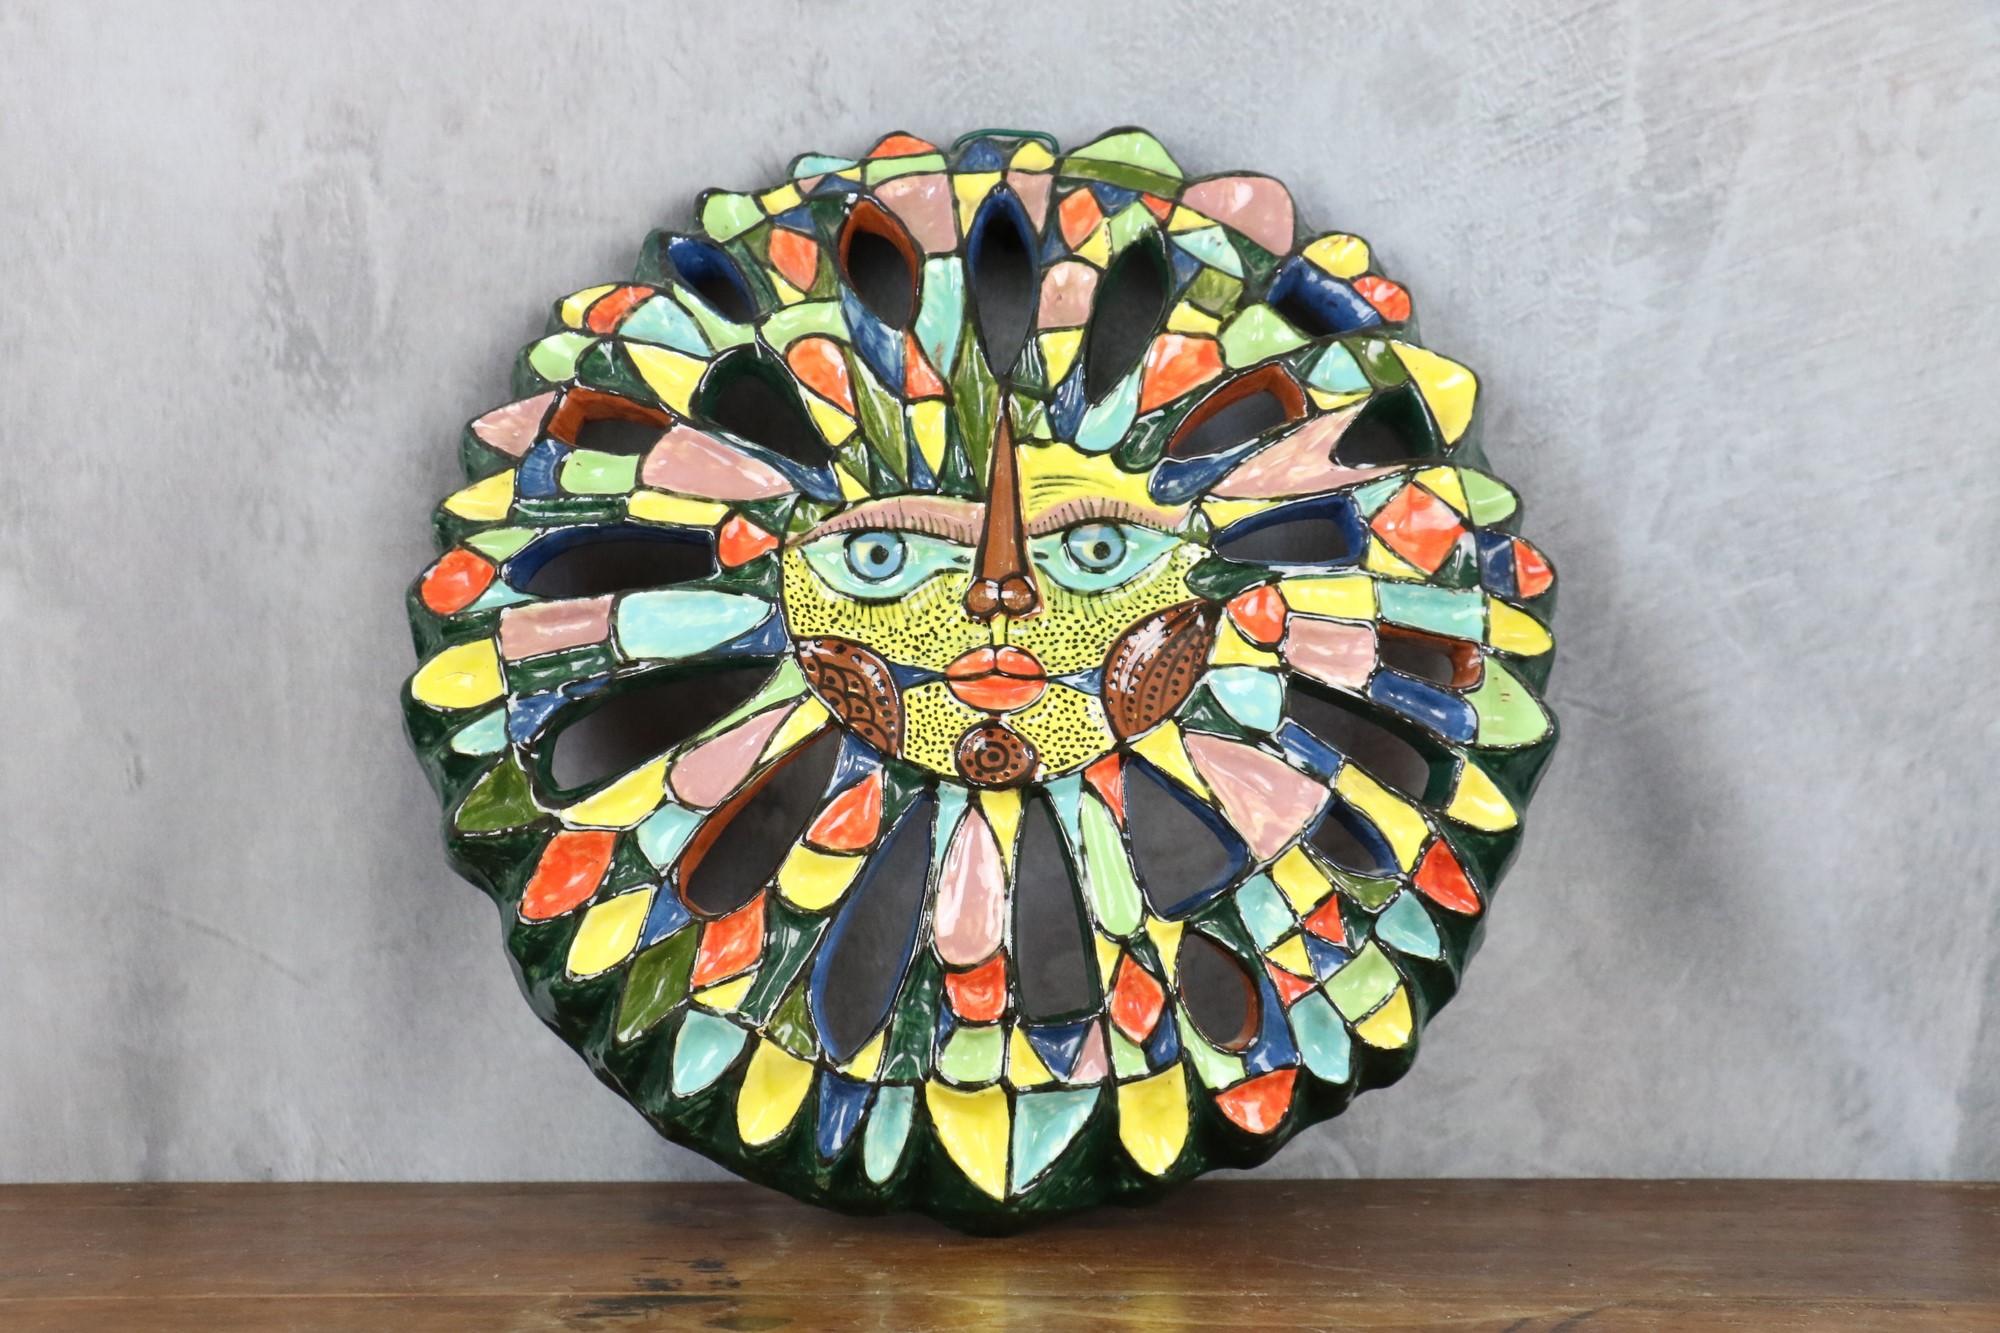 Large ceramic wall sculpture with sun design, Circa 1970s

Superb ceramic sculpture attributed to Roland Zobel. The large sculpture, with its brightly colored glazes, is a magnificent piece. A real eye-catcher. It recalls the creations of the 50s in